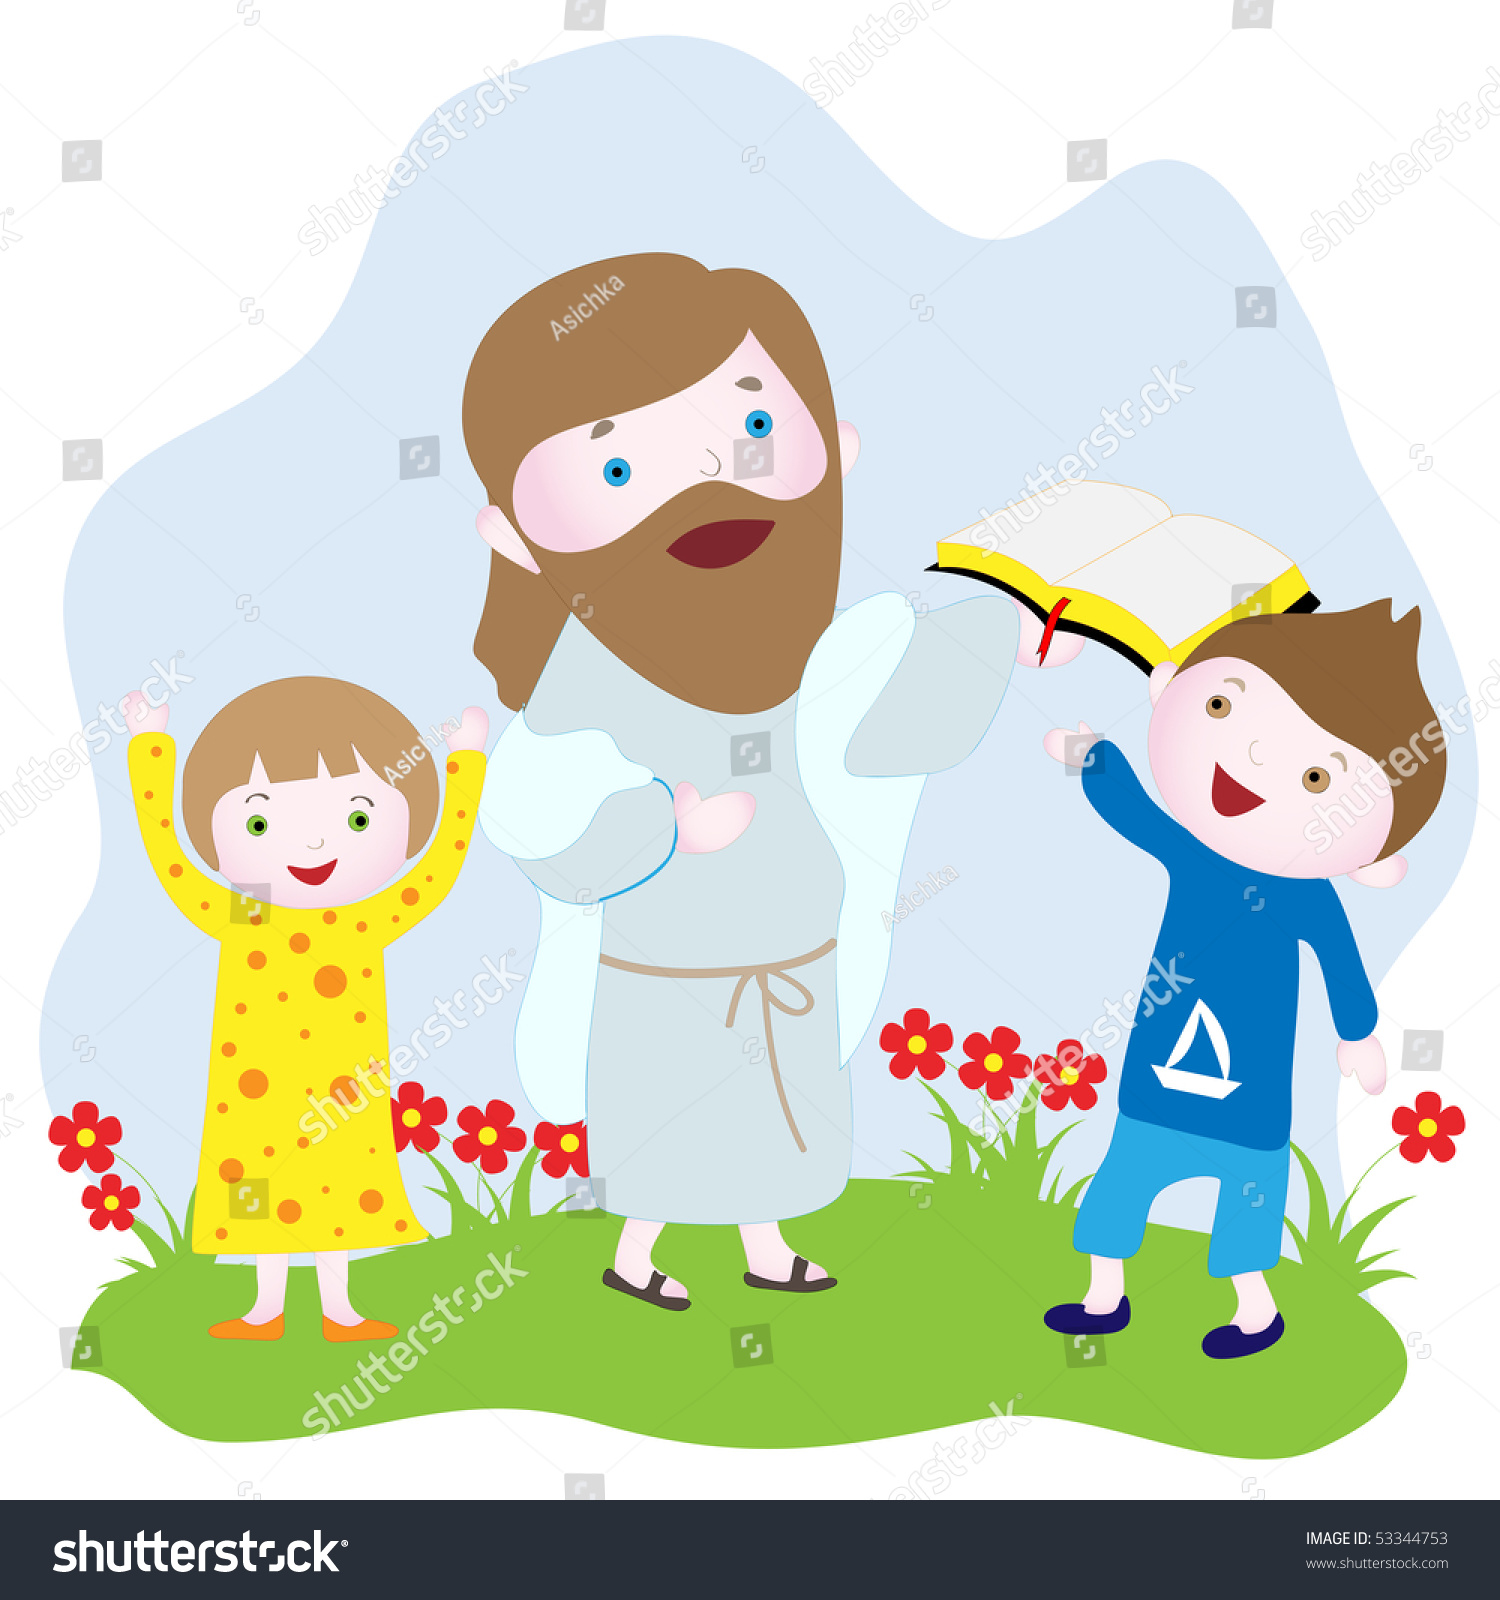 clipart of jesus holding baby - photo #16